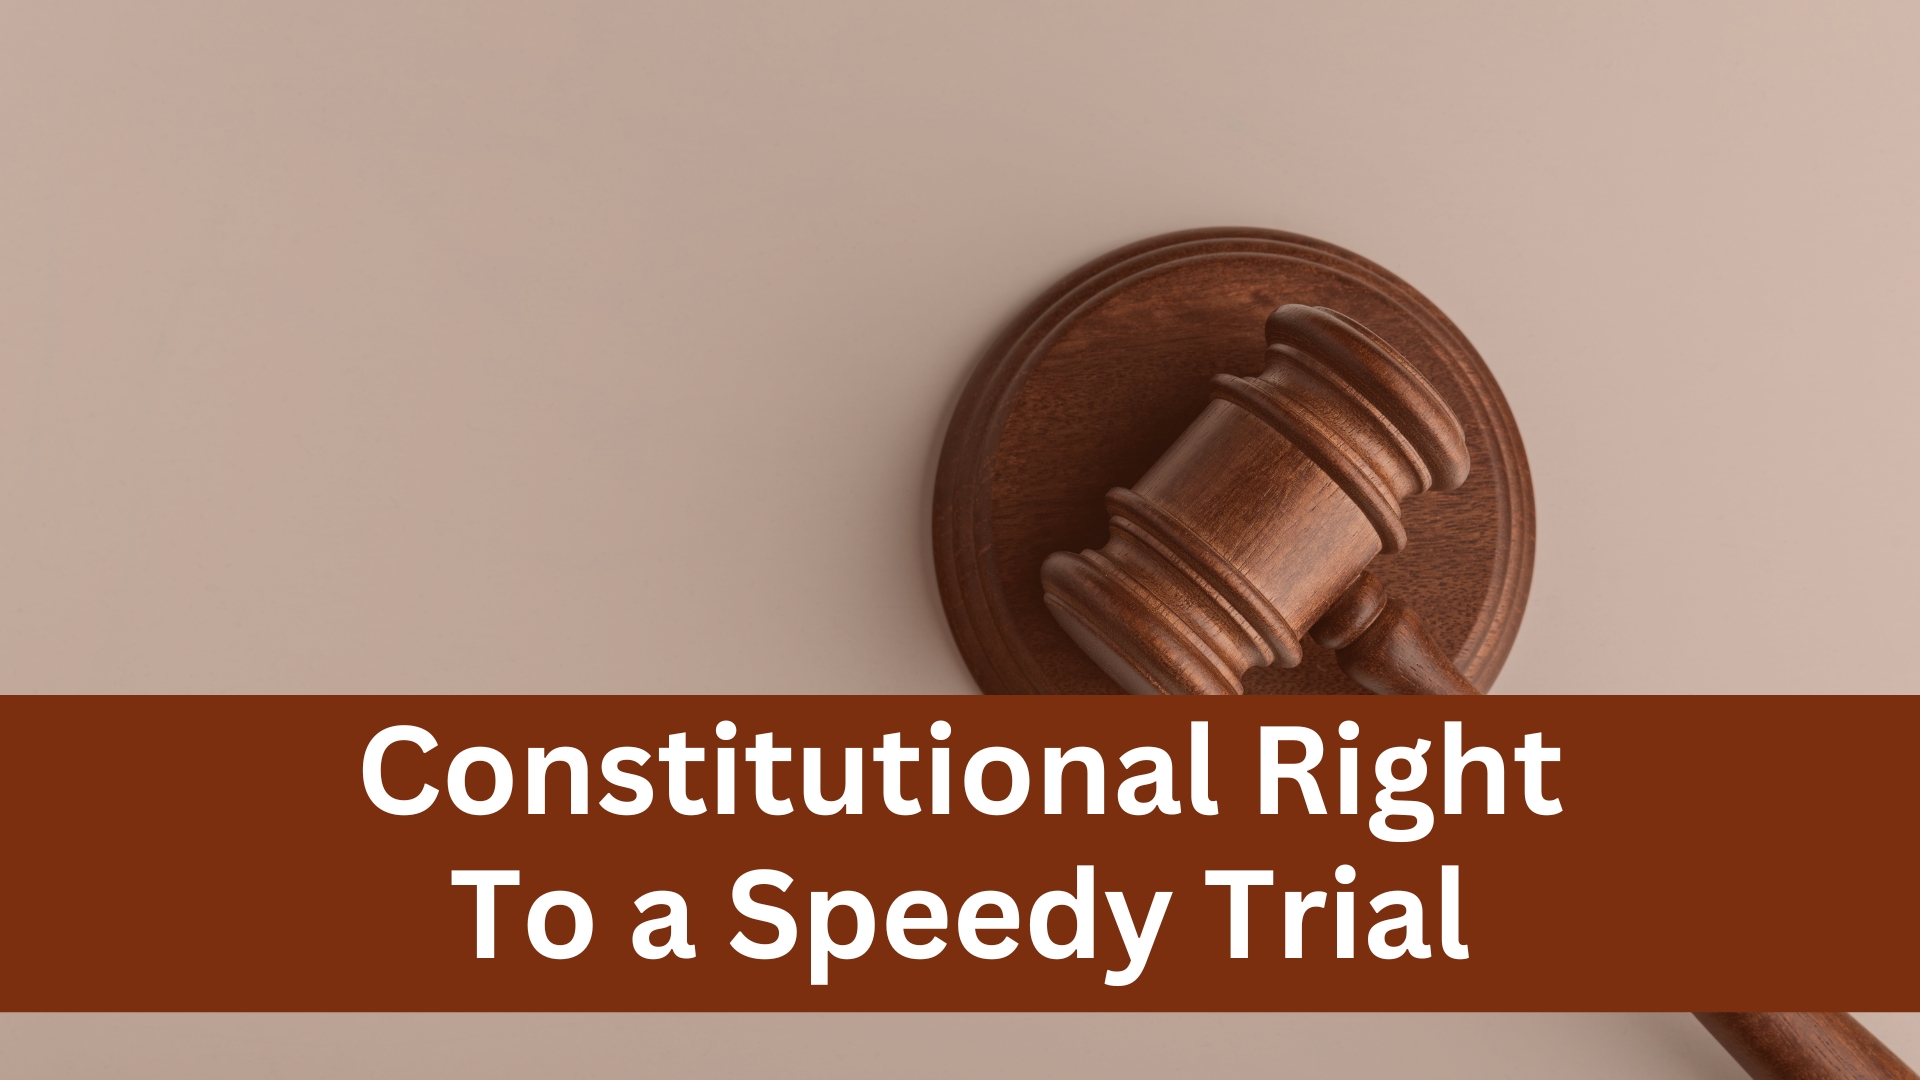 Constitutional right to a speedy trial